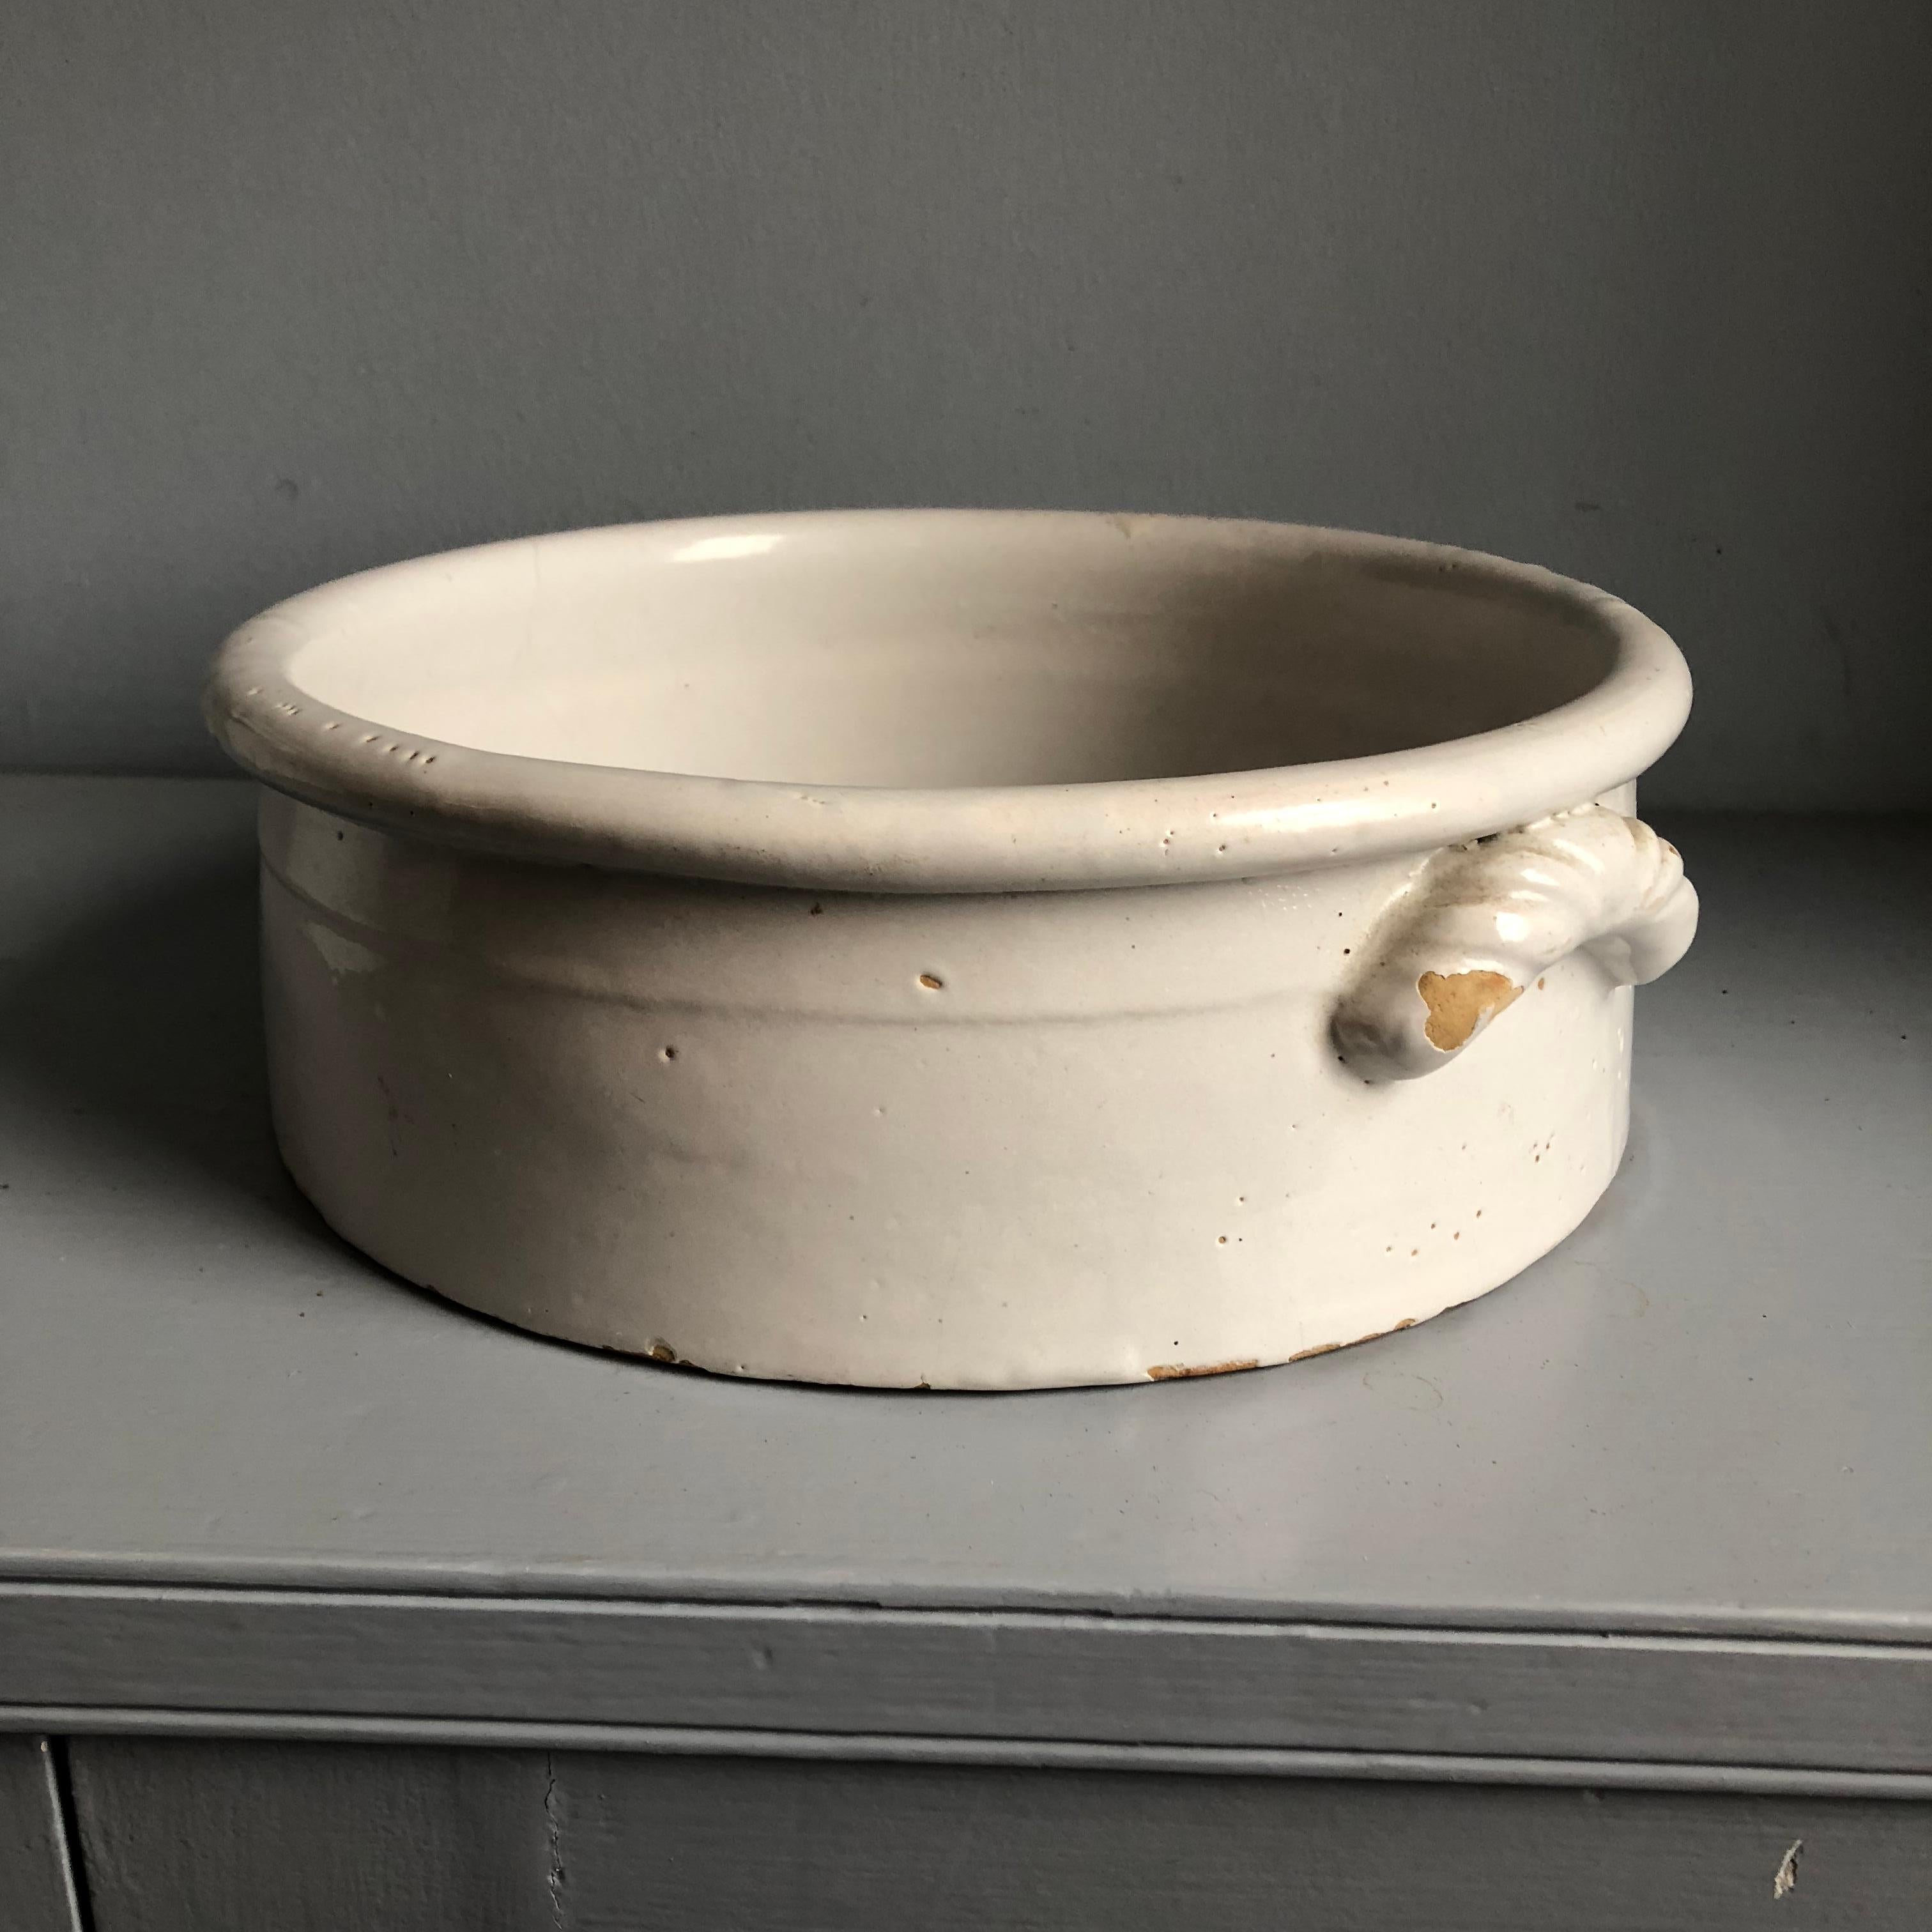 A white glazed ceramic “cachepot” with braided handles, French, circa 1870.